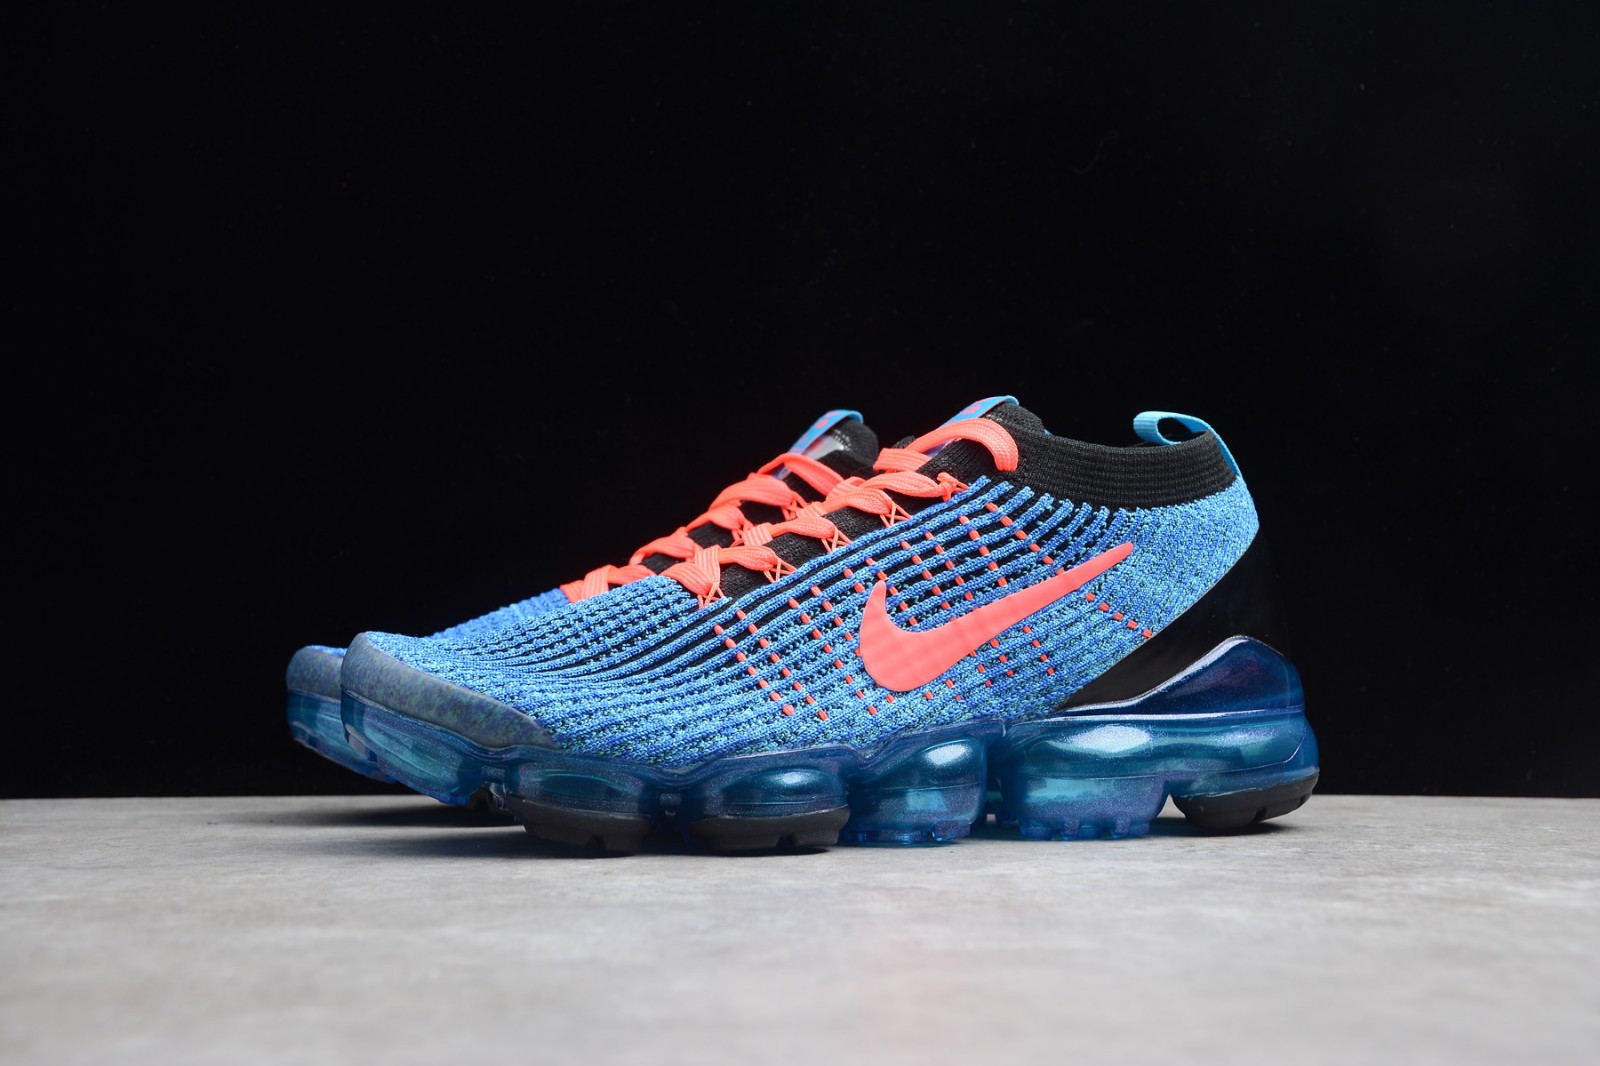 vapormax flyknit orange and blue